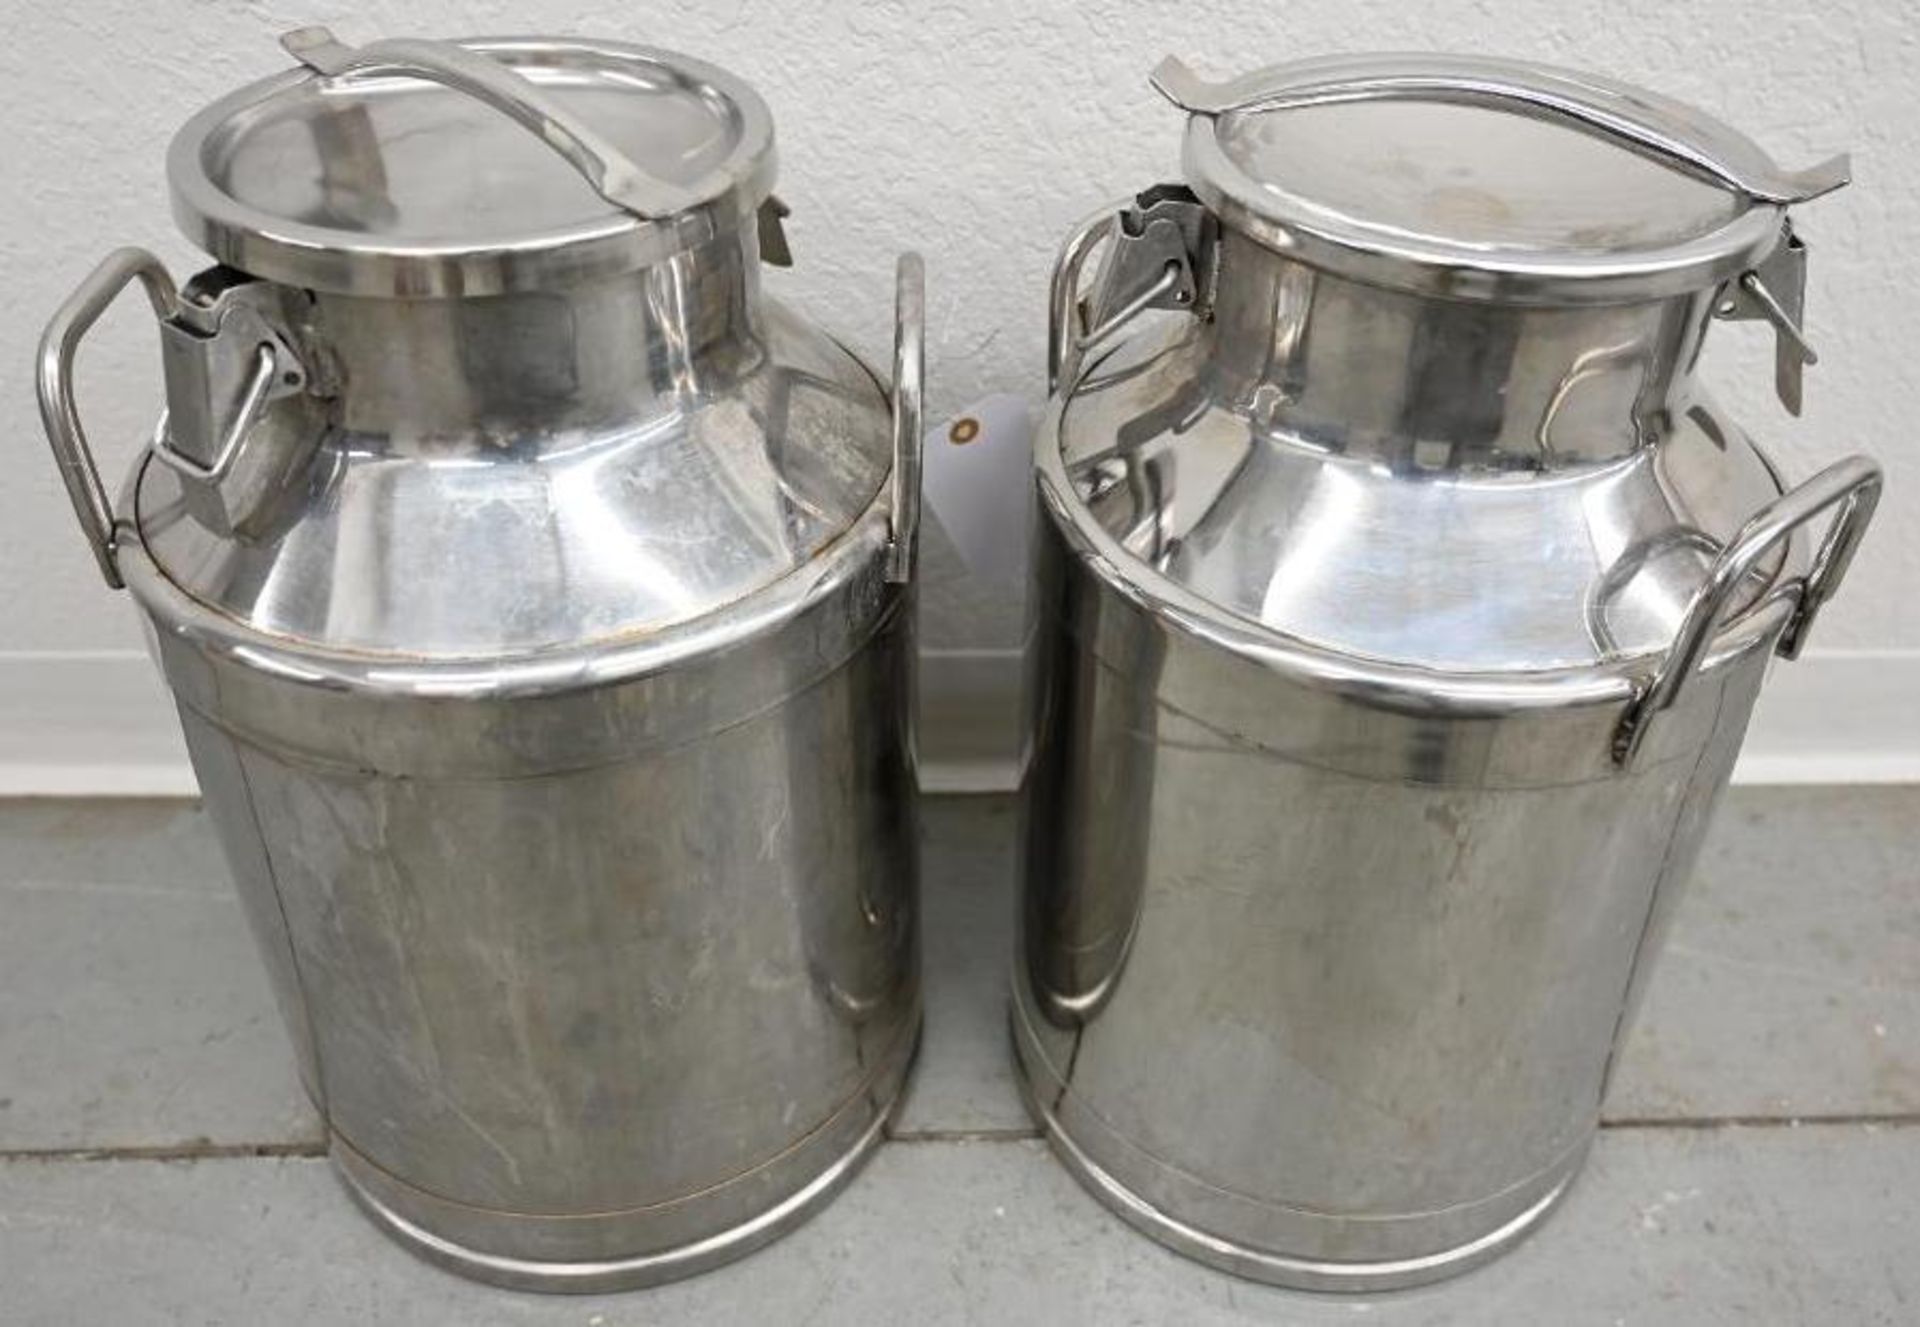 Two 12x12x21" Stainless Steel Milk Cans - Image 2 of 3